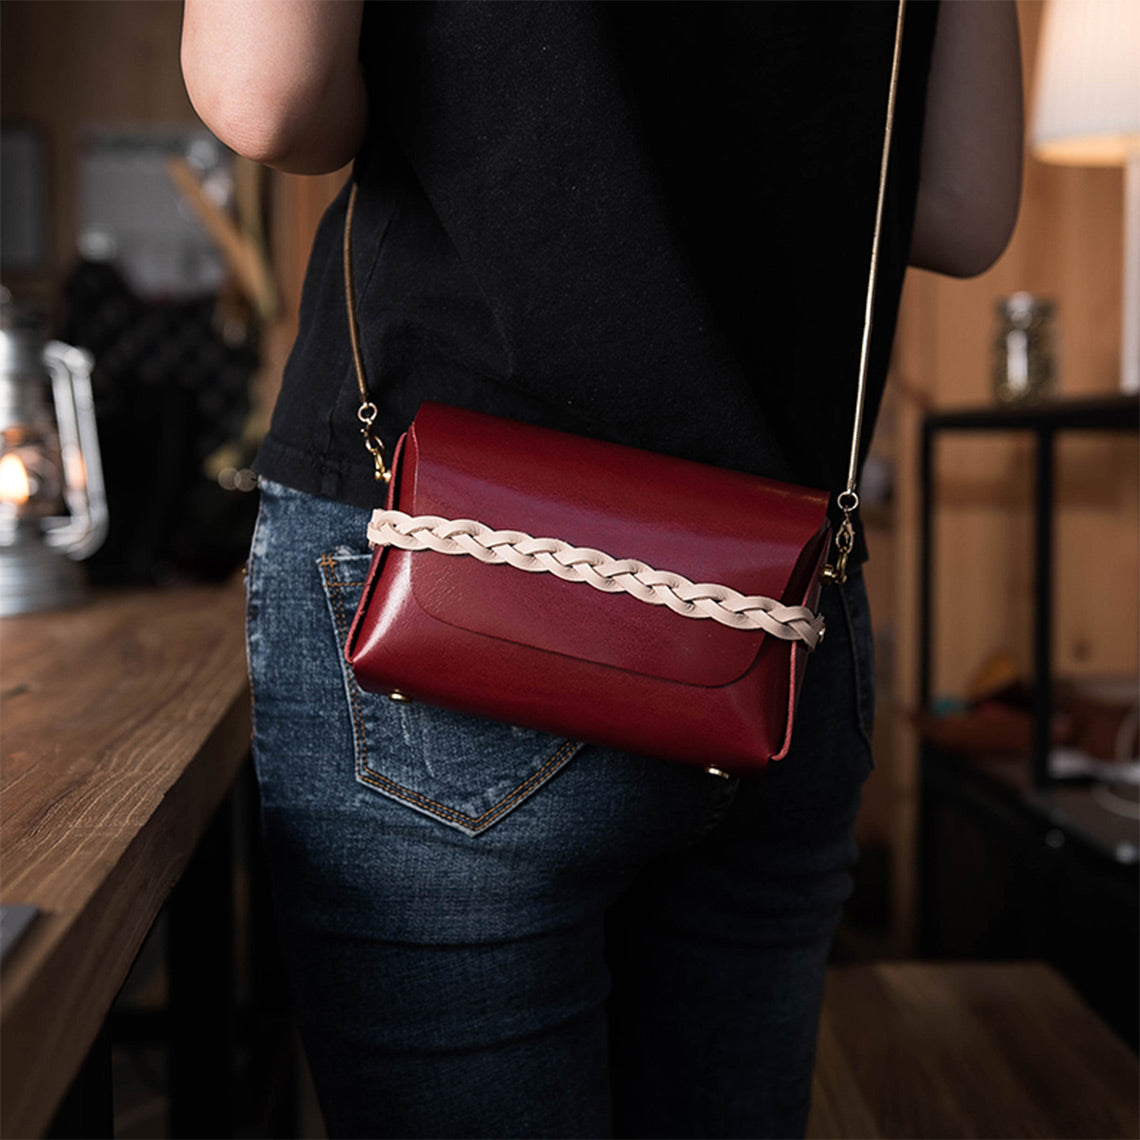 Small red bag leather | bag for women in vintage style 